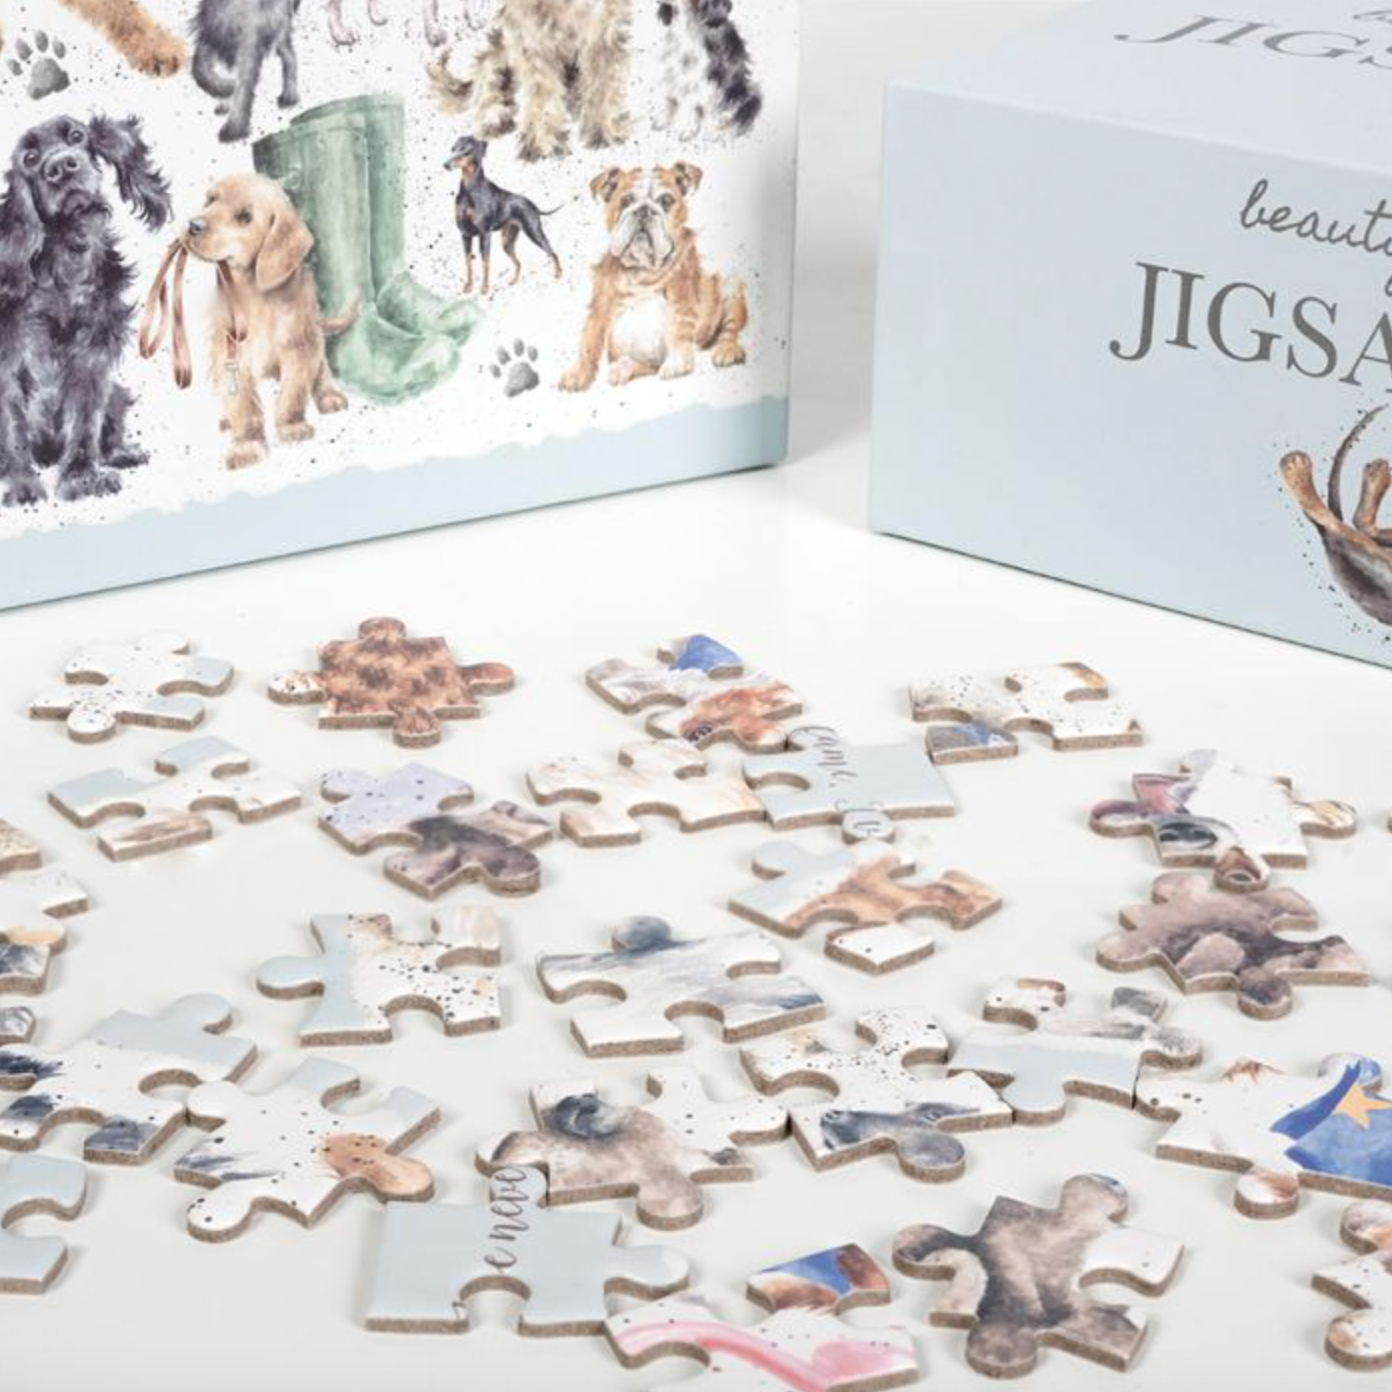 1000 Piece A Dogs Life Jigsaw Puzzle